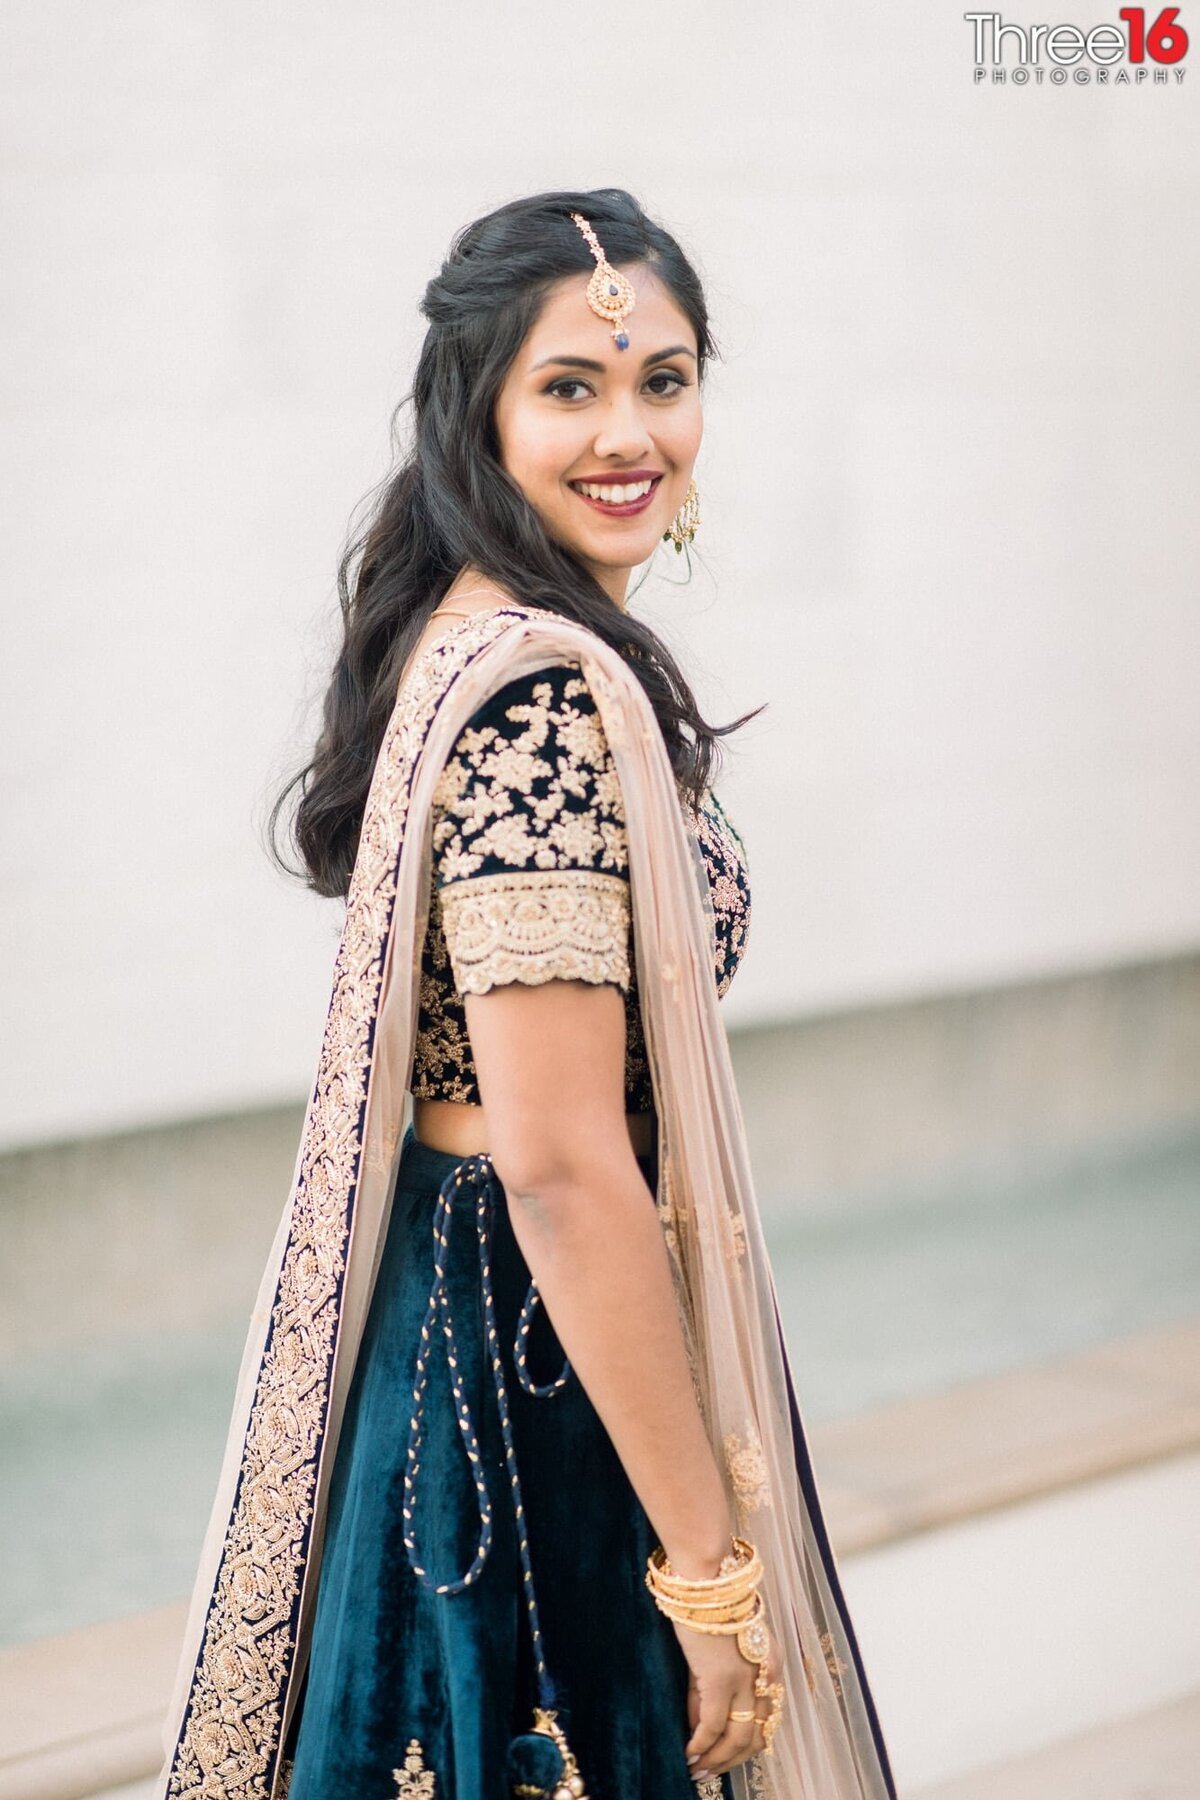 Beautiful Indian Bride wearing a traditional Indian wedding gown poses for photos with a big smile